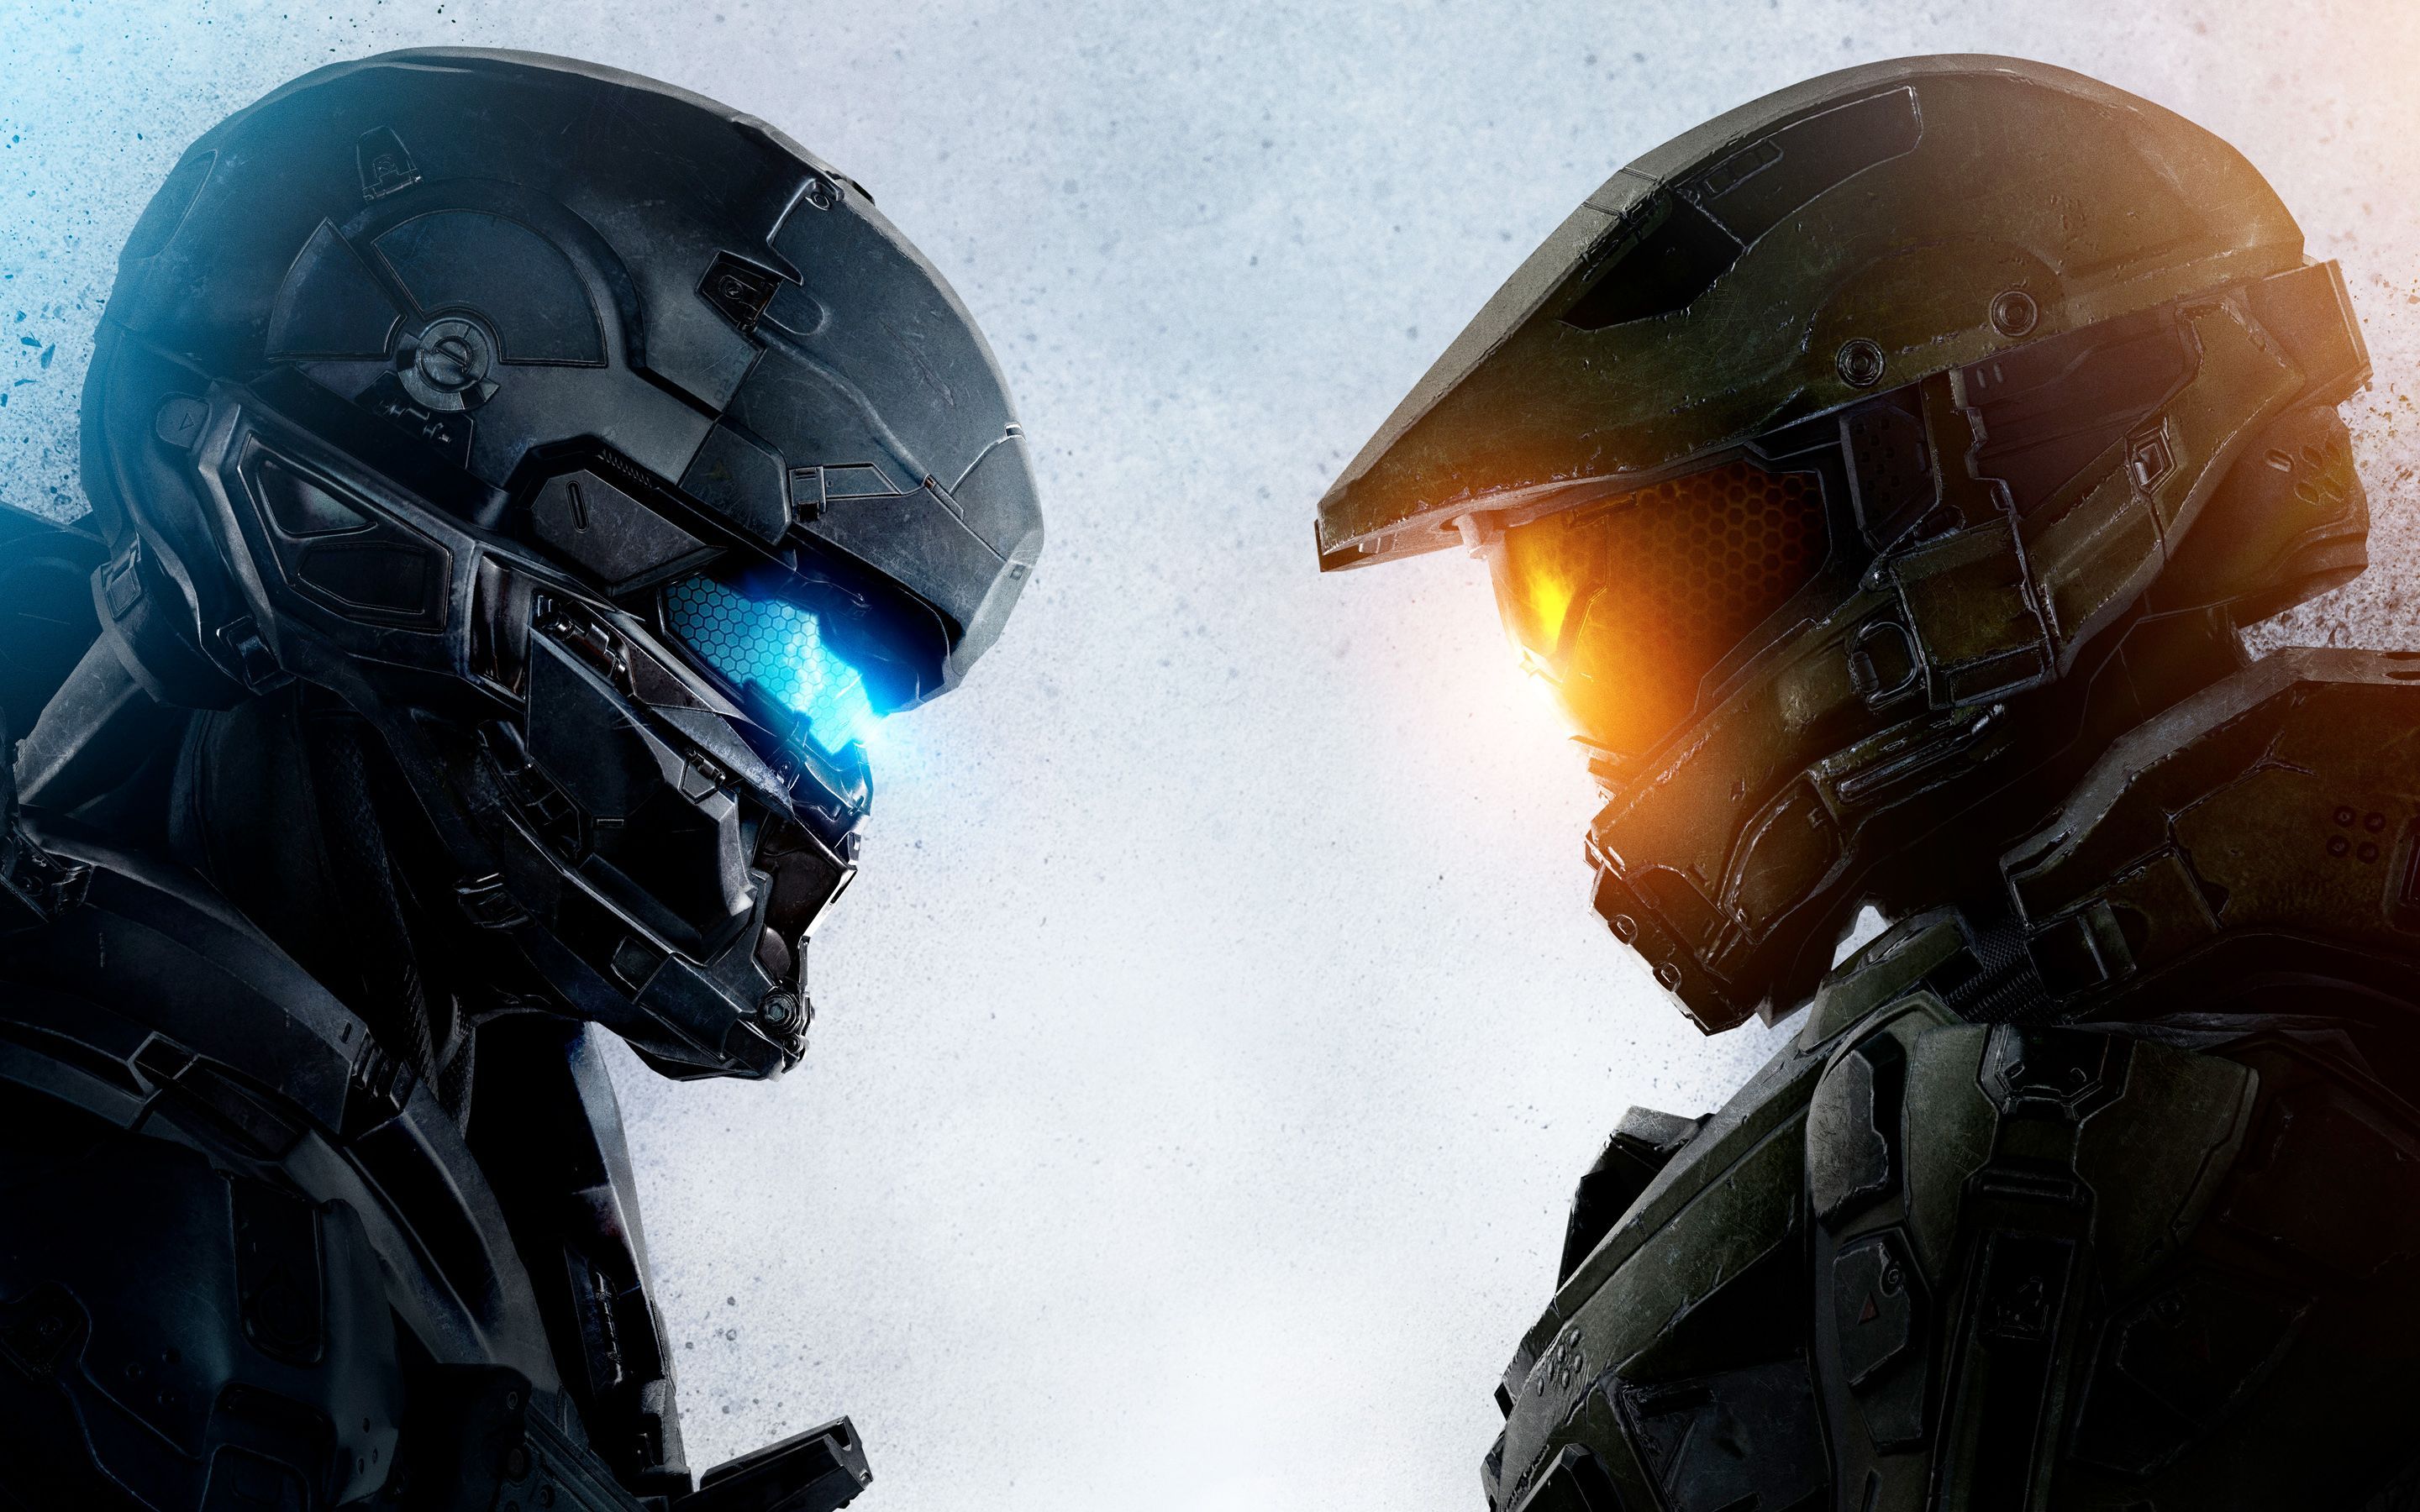 2015 Halo 5 Guardians Wallpapers | HD Wallpapers